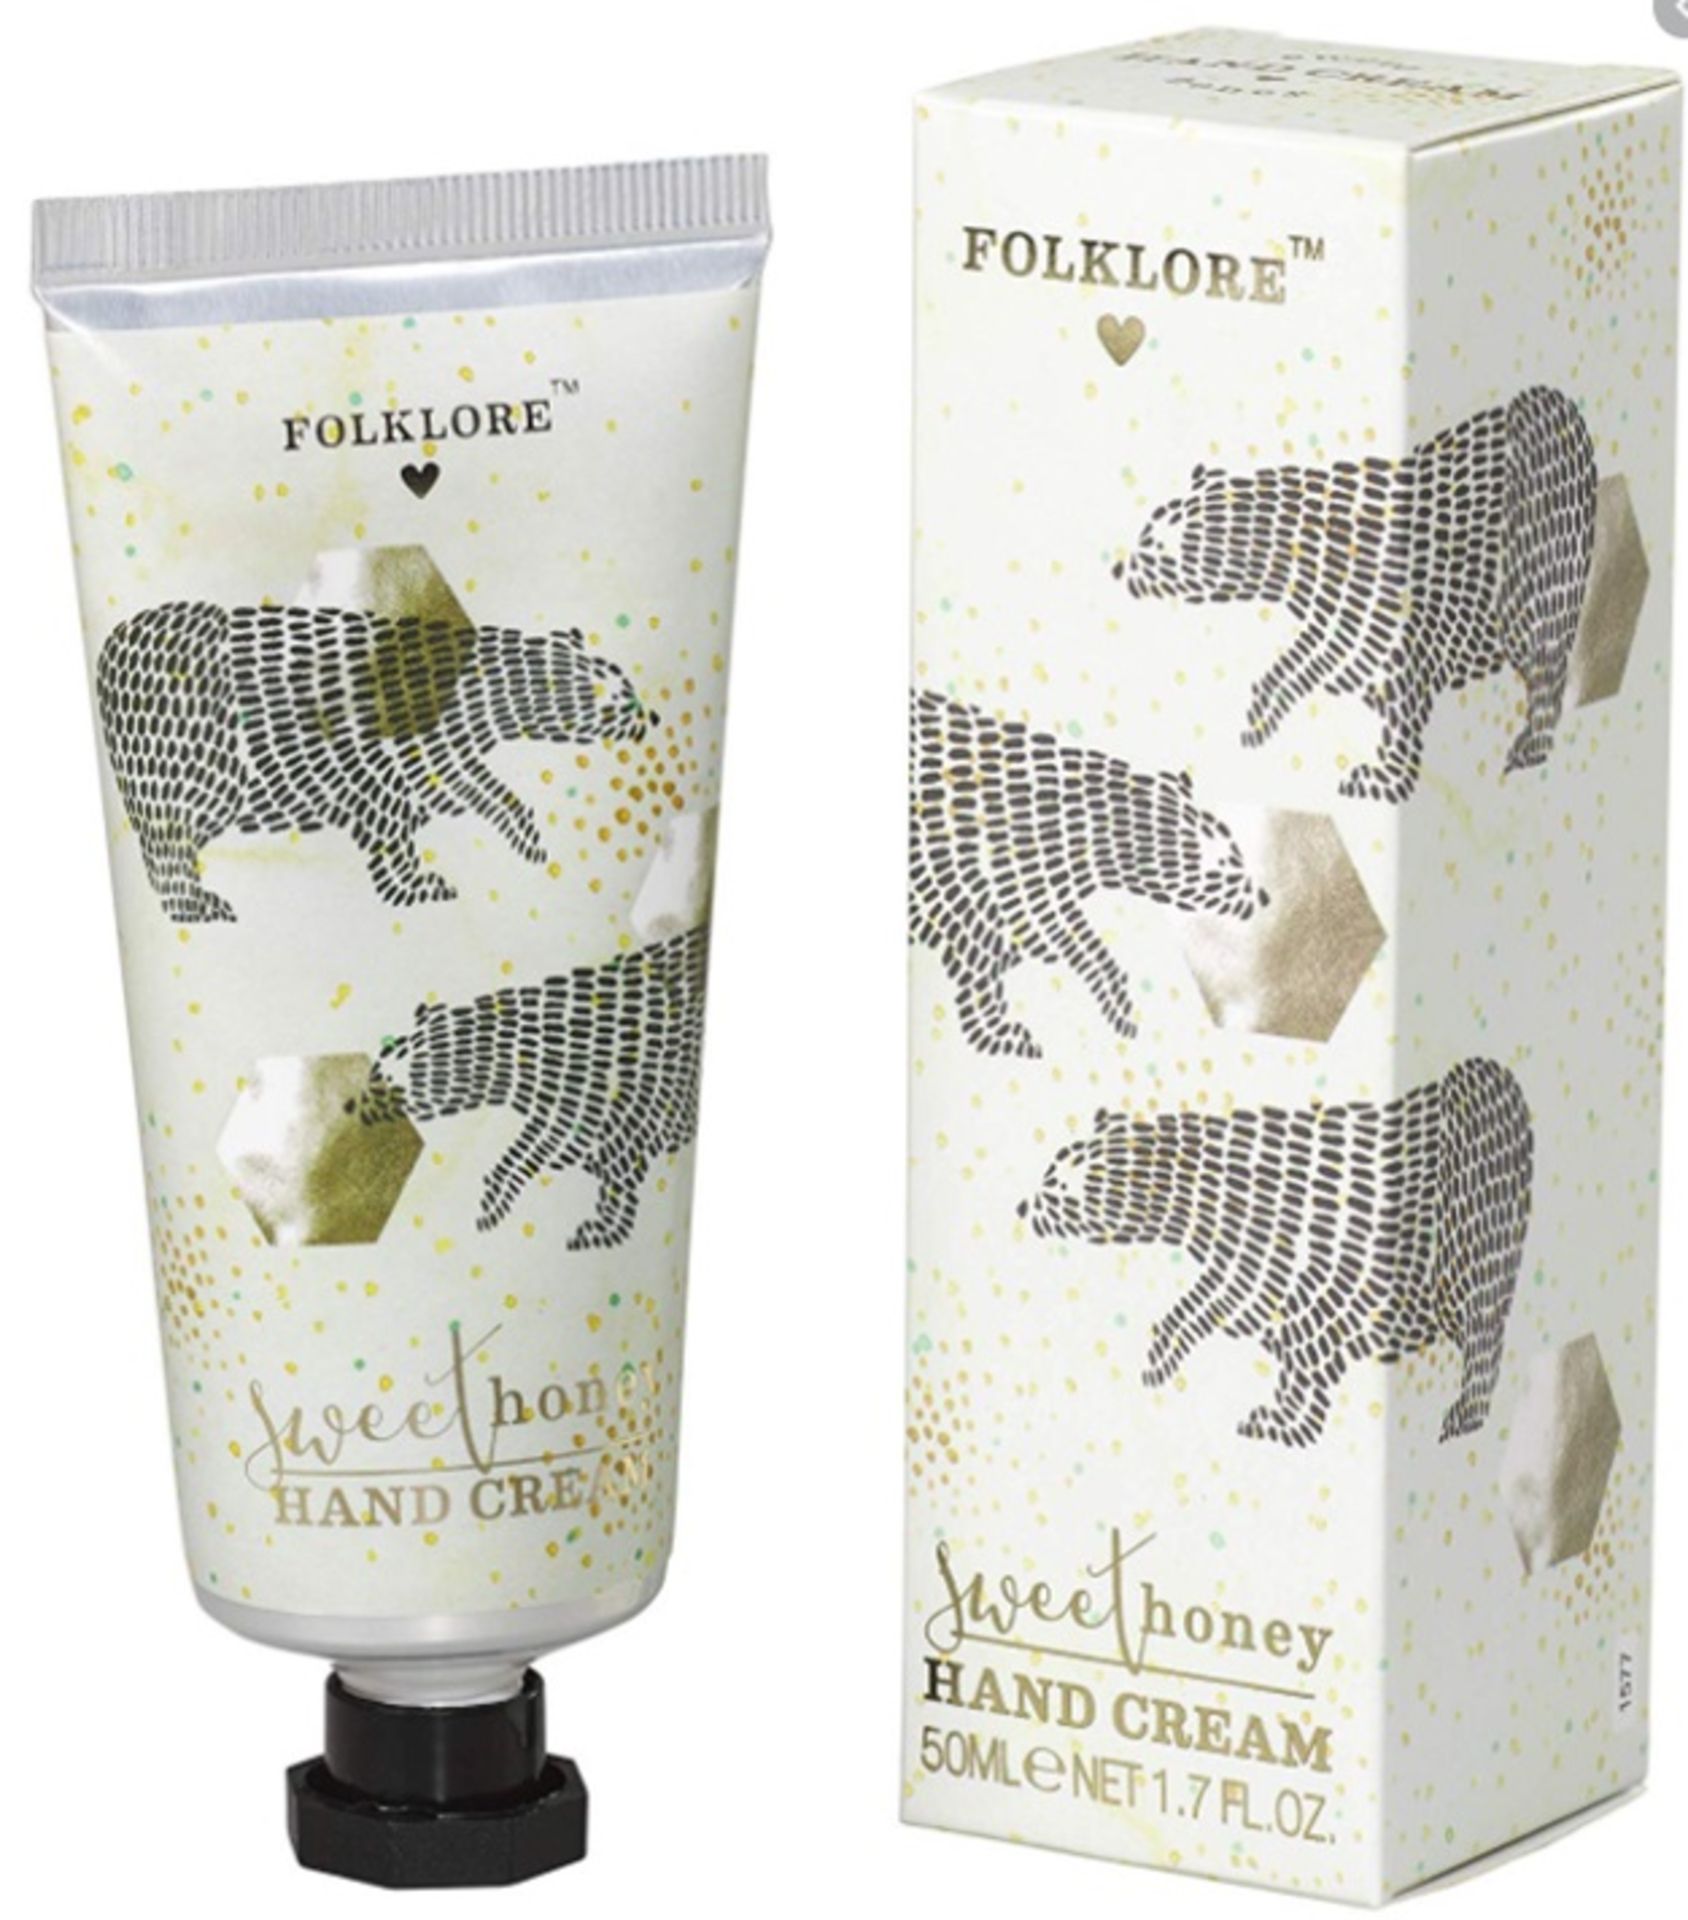 100 x Various Folklore Handcream | 50ml | Total RRP £899 - Image 3 of 4